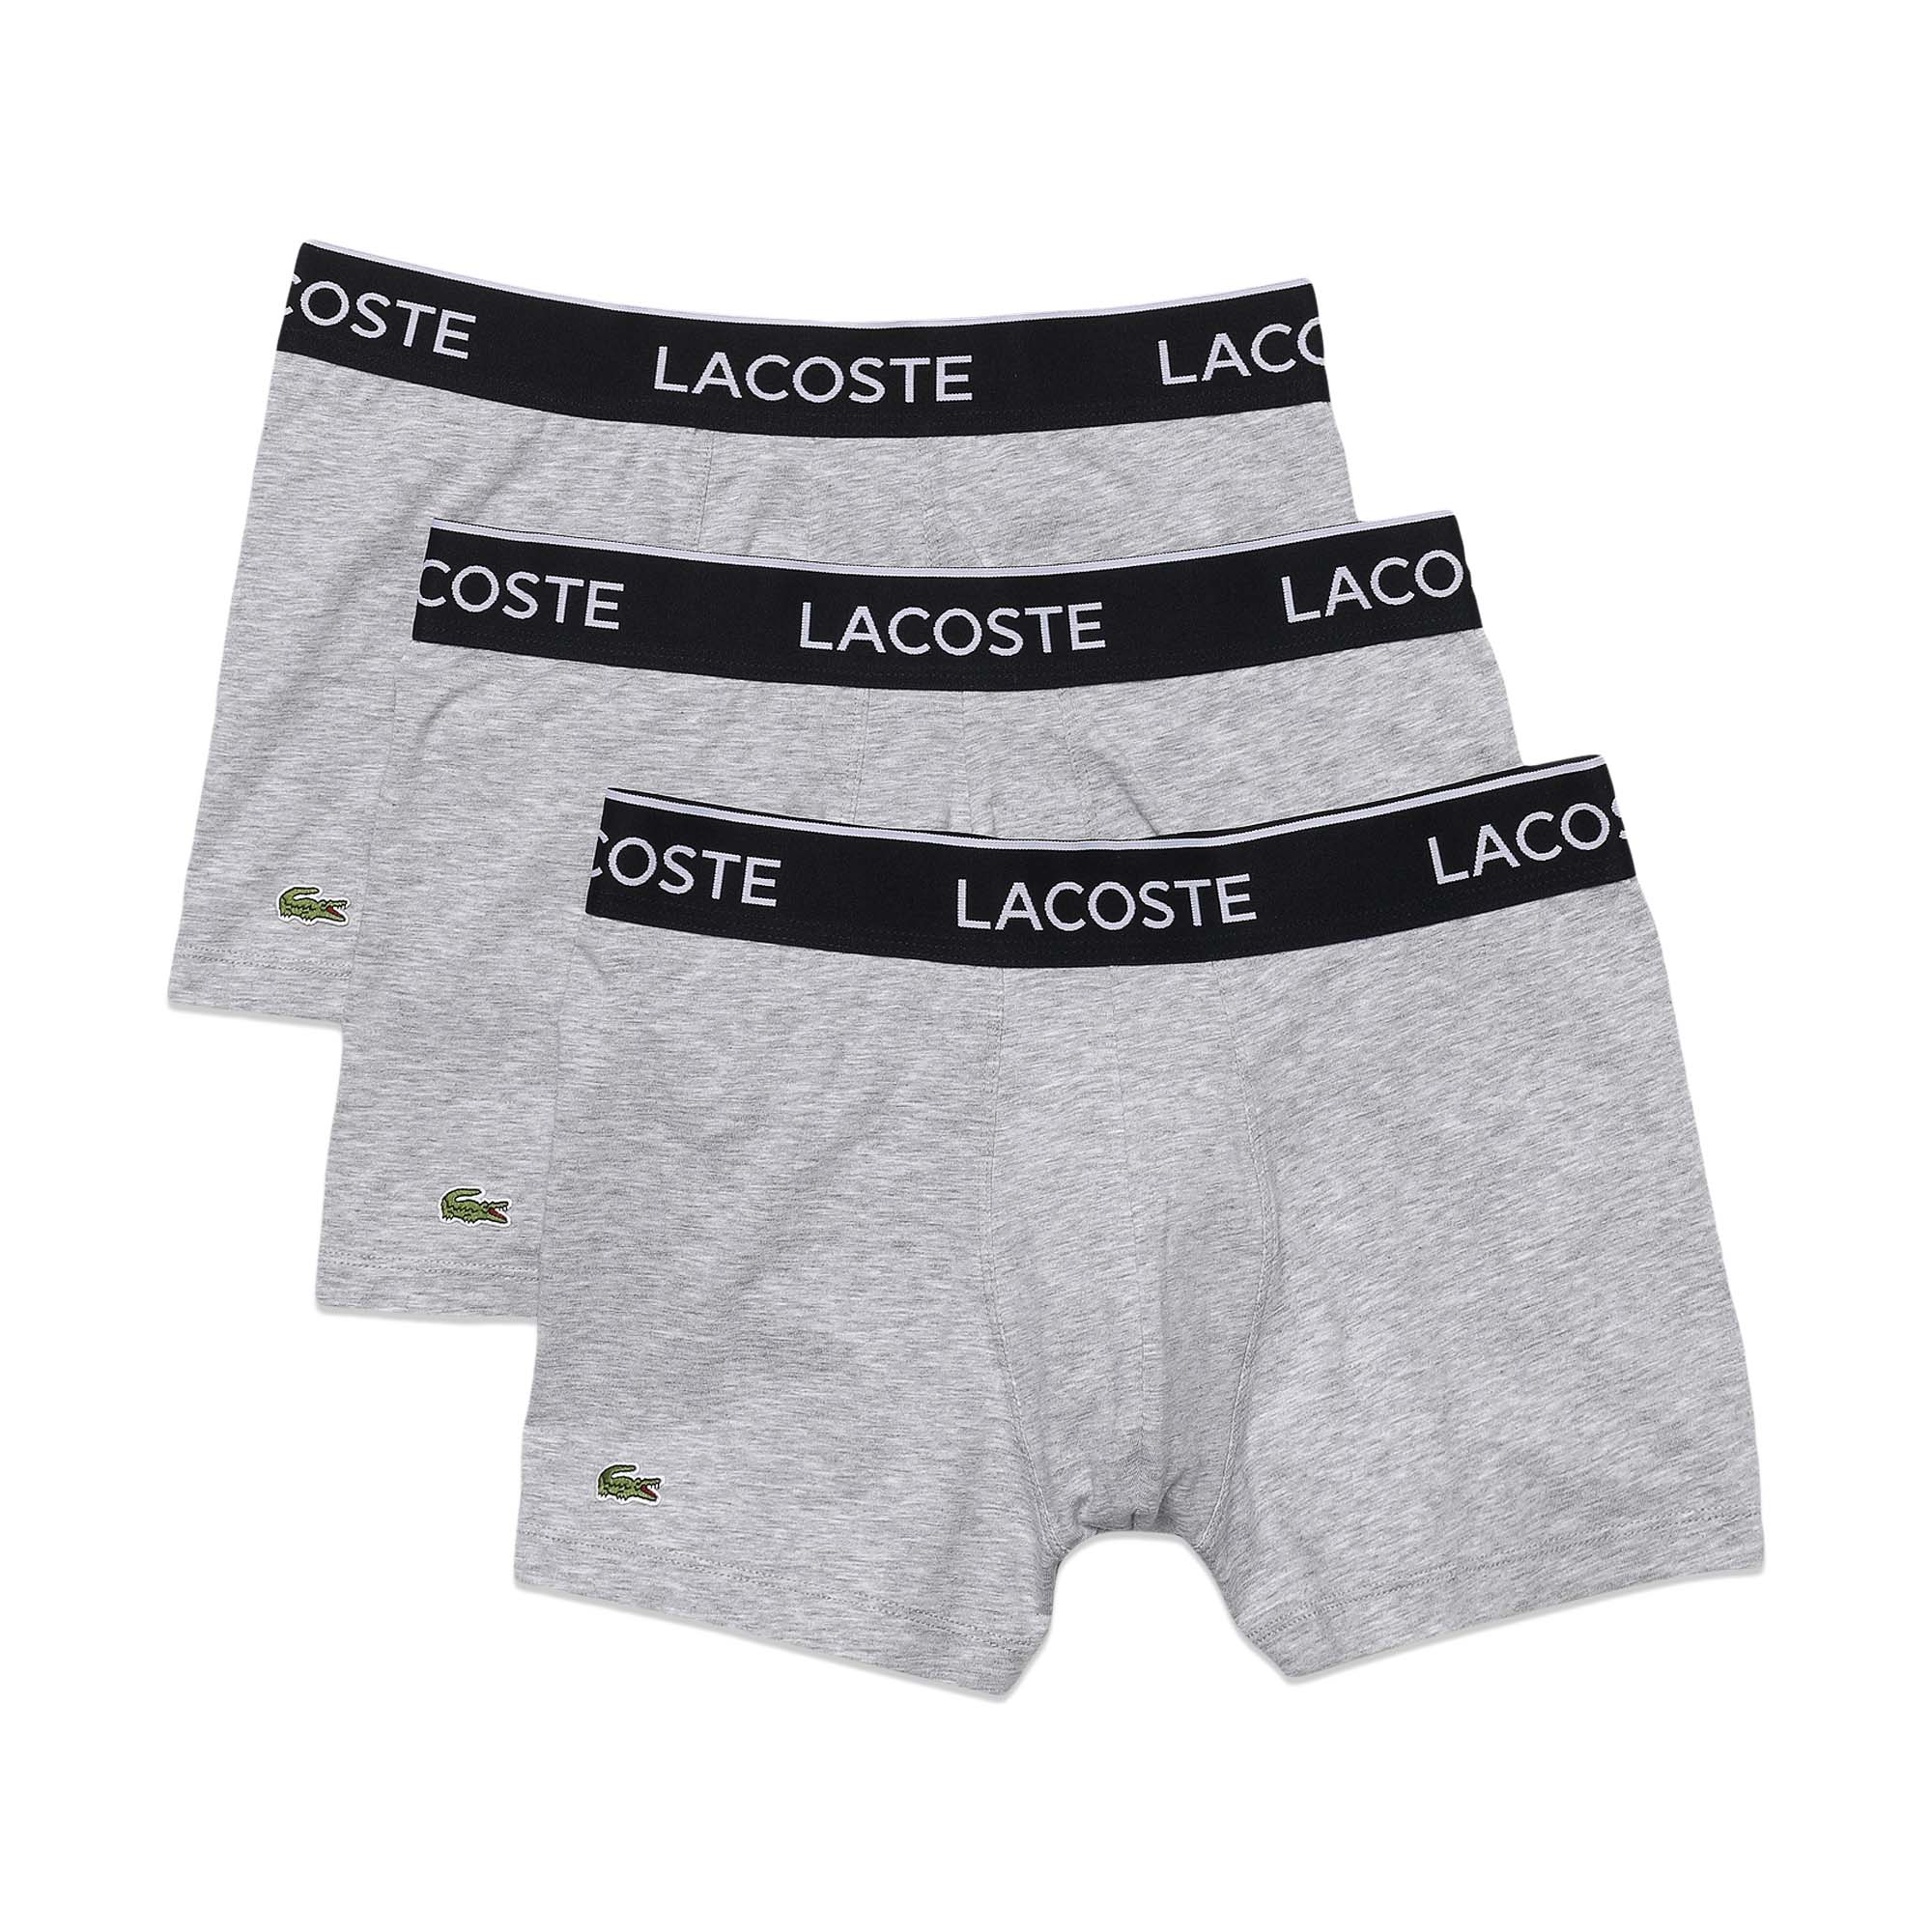 Lacoste 3 Pack Cotton Stretch Trunks - Grey Chine